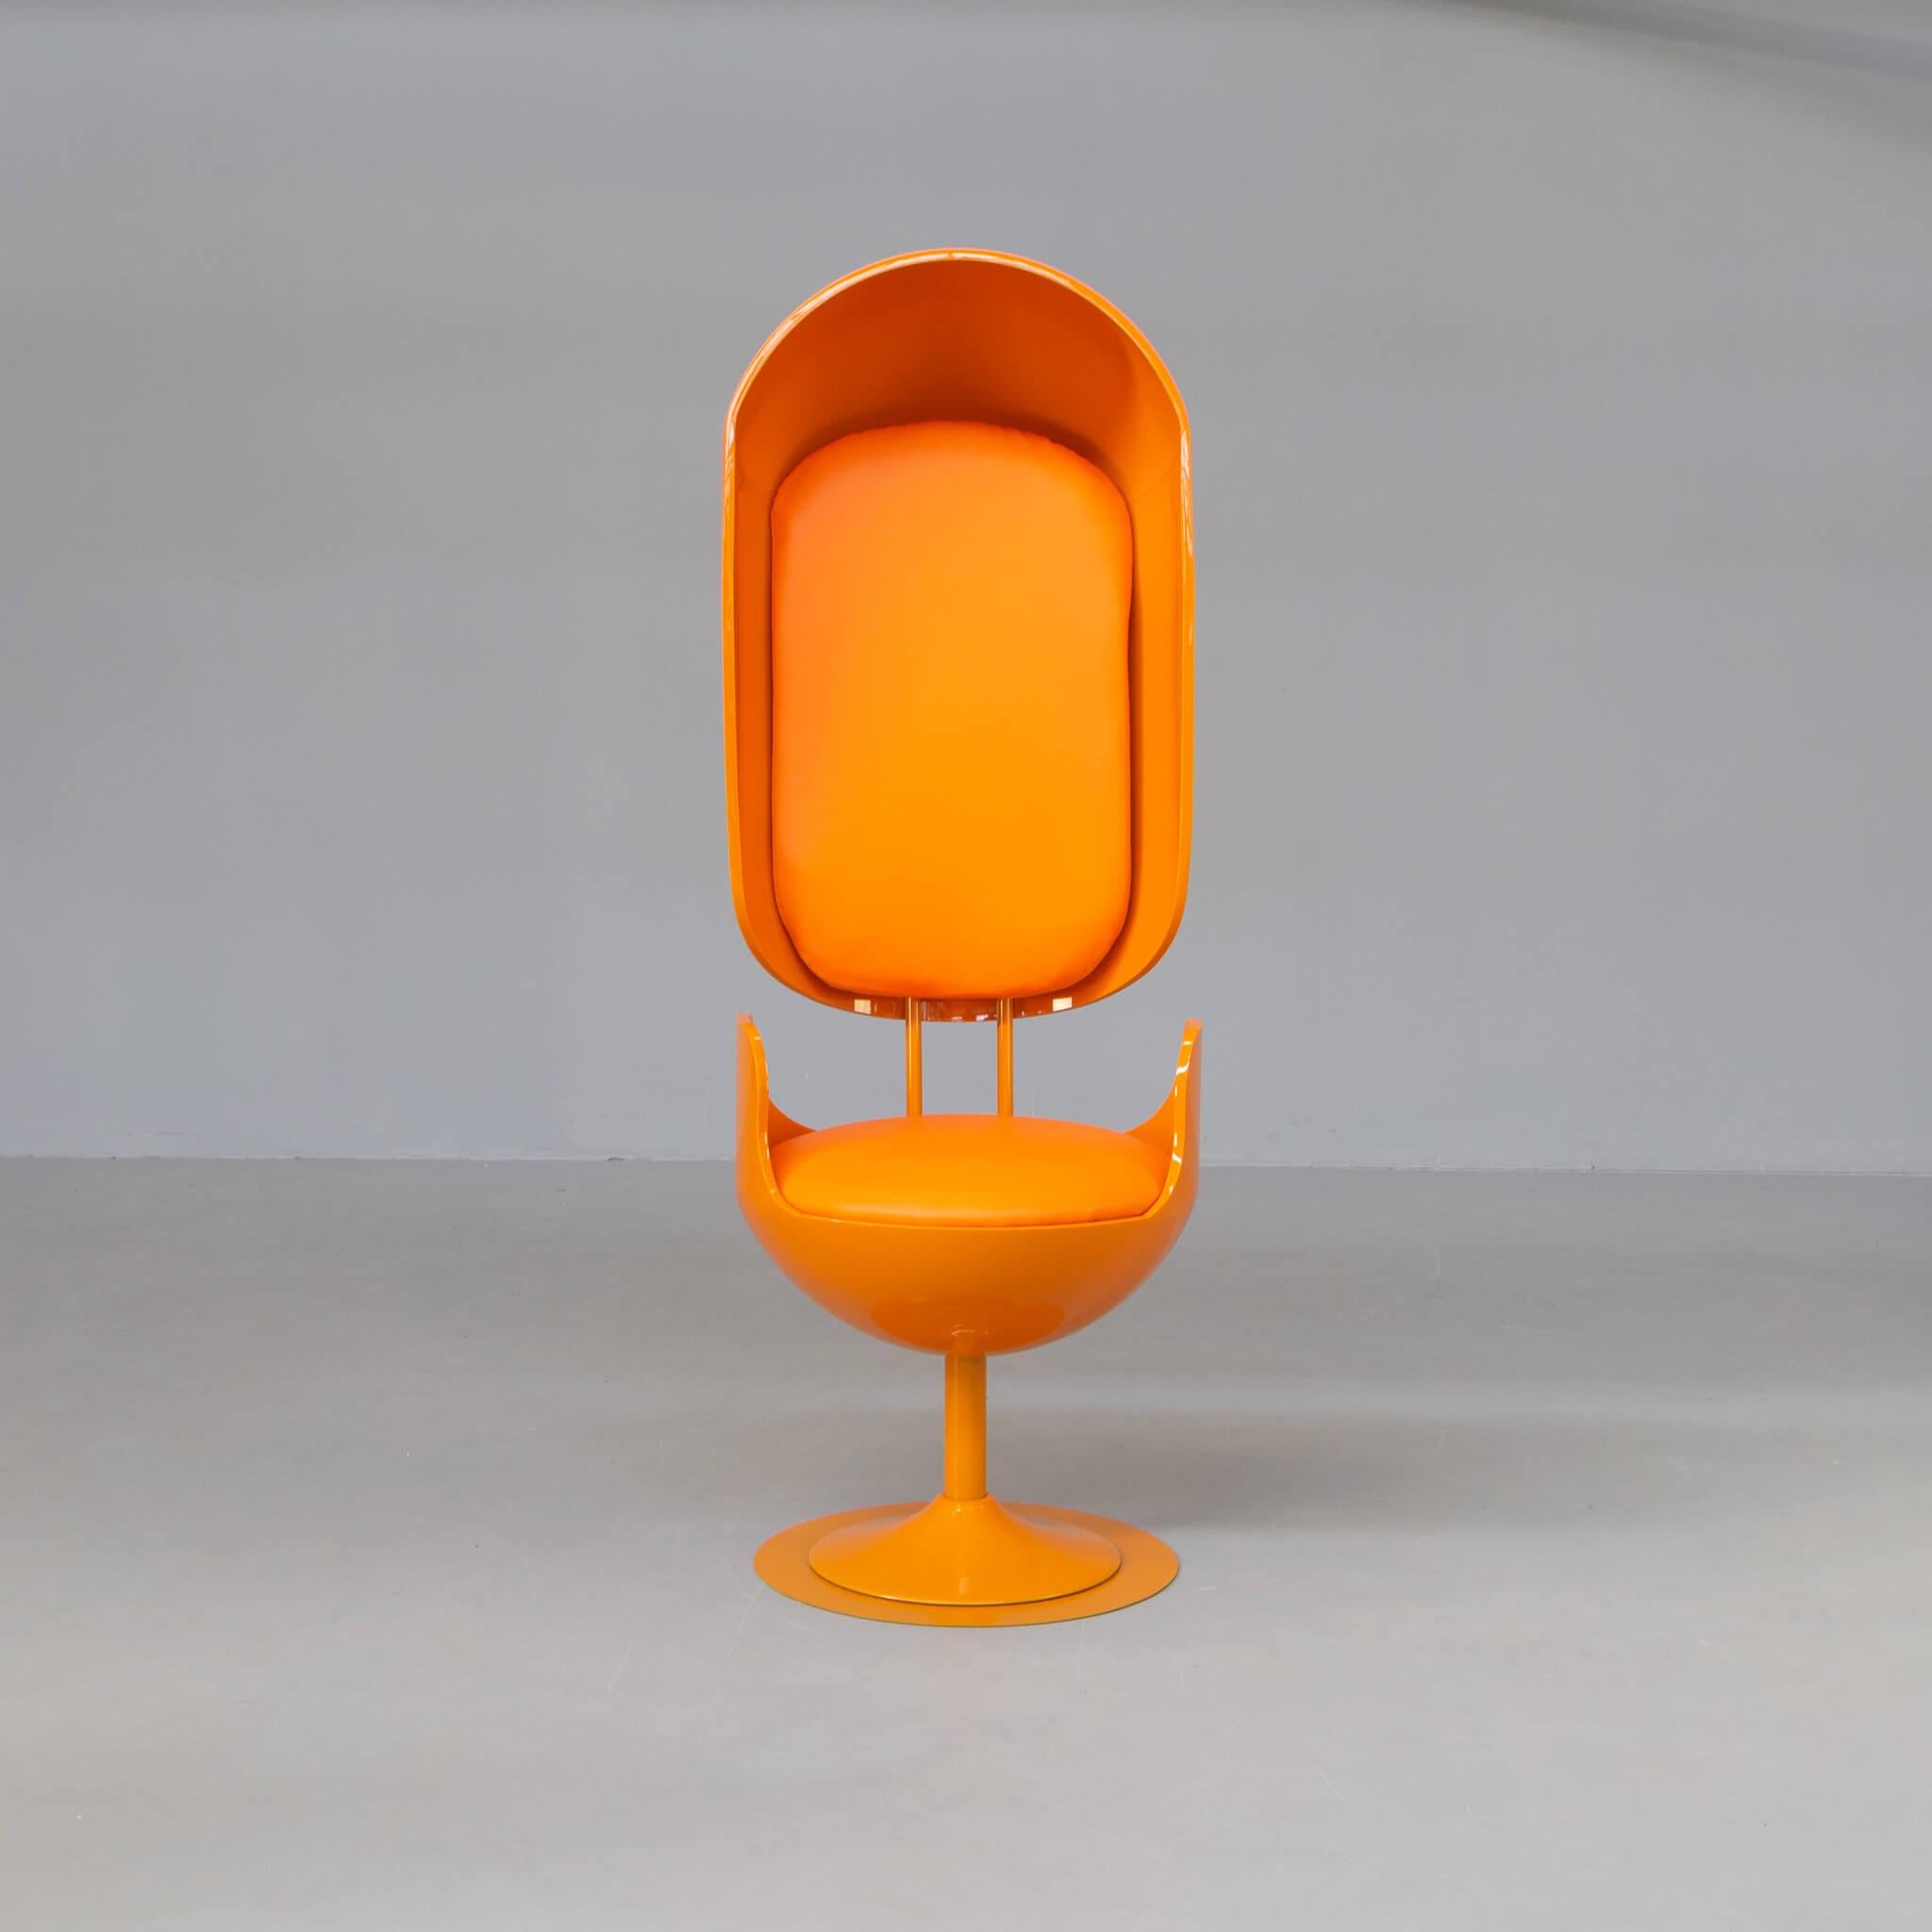 Merel Bekking, 30, graduated from Utrecht School of the Arts with a degree in product design in 2011. She began her own studio in 2012 and is currently based in north Wales in the UK. This beautiful and rare orange swivel chair was designed by Merel